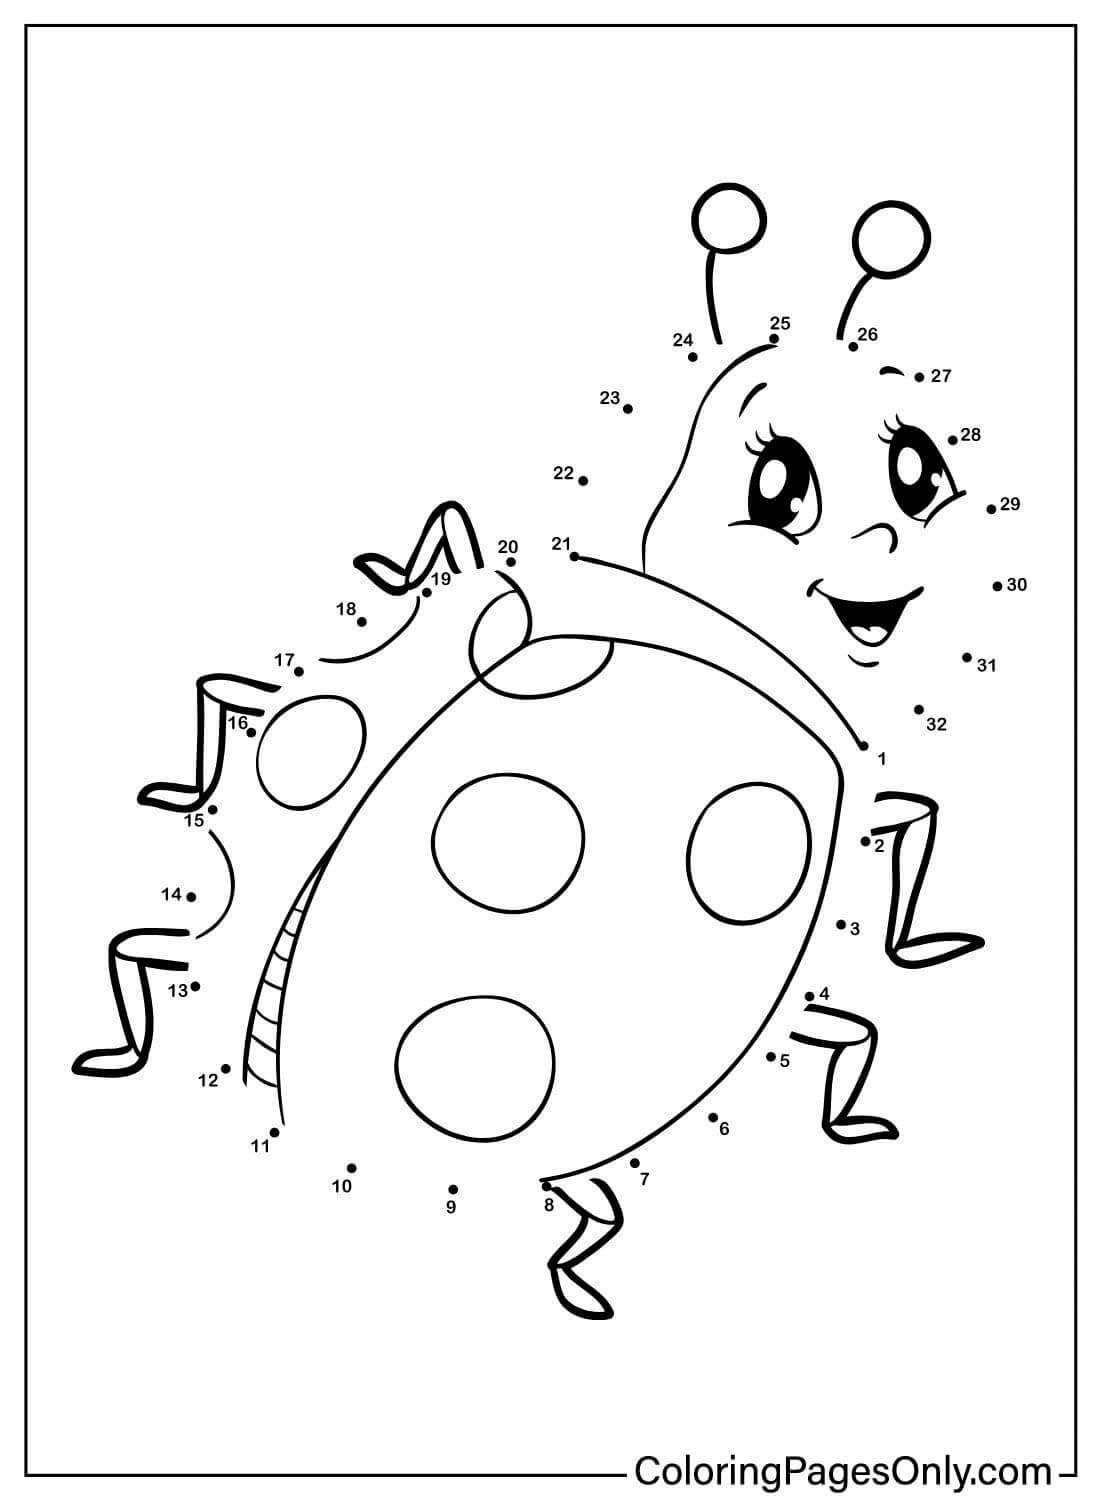 Connect the Dots Ladybug Coloring Page from Ladybug